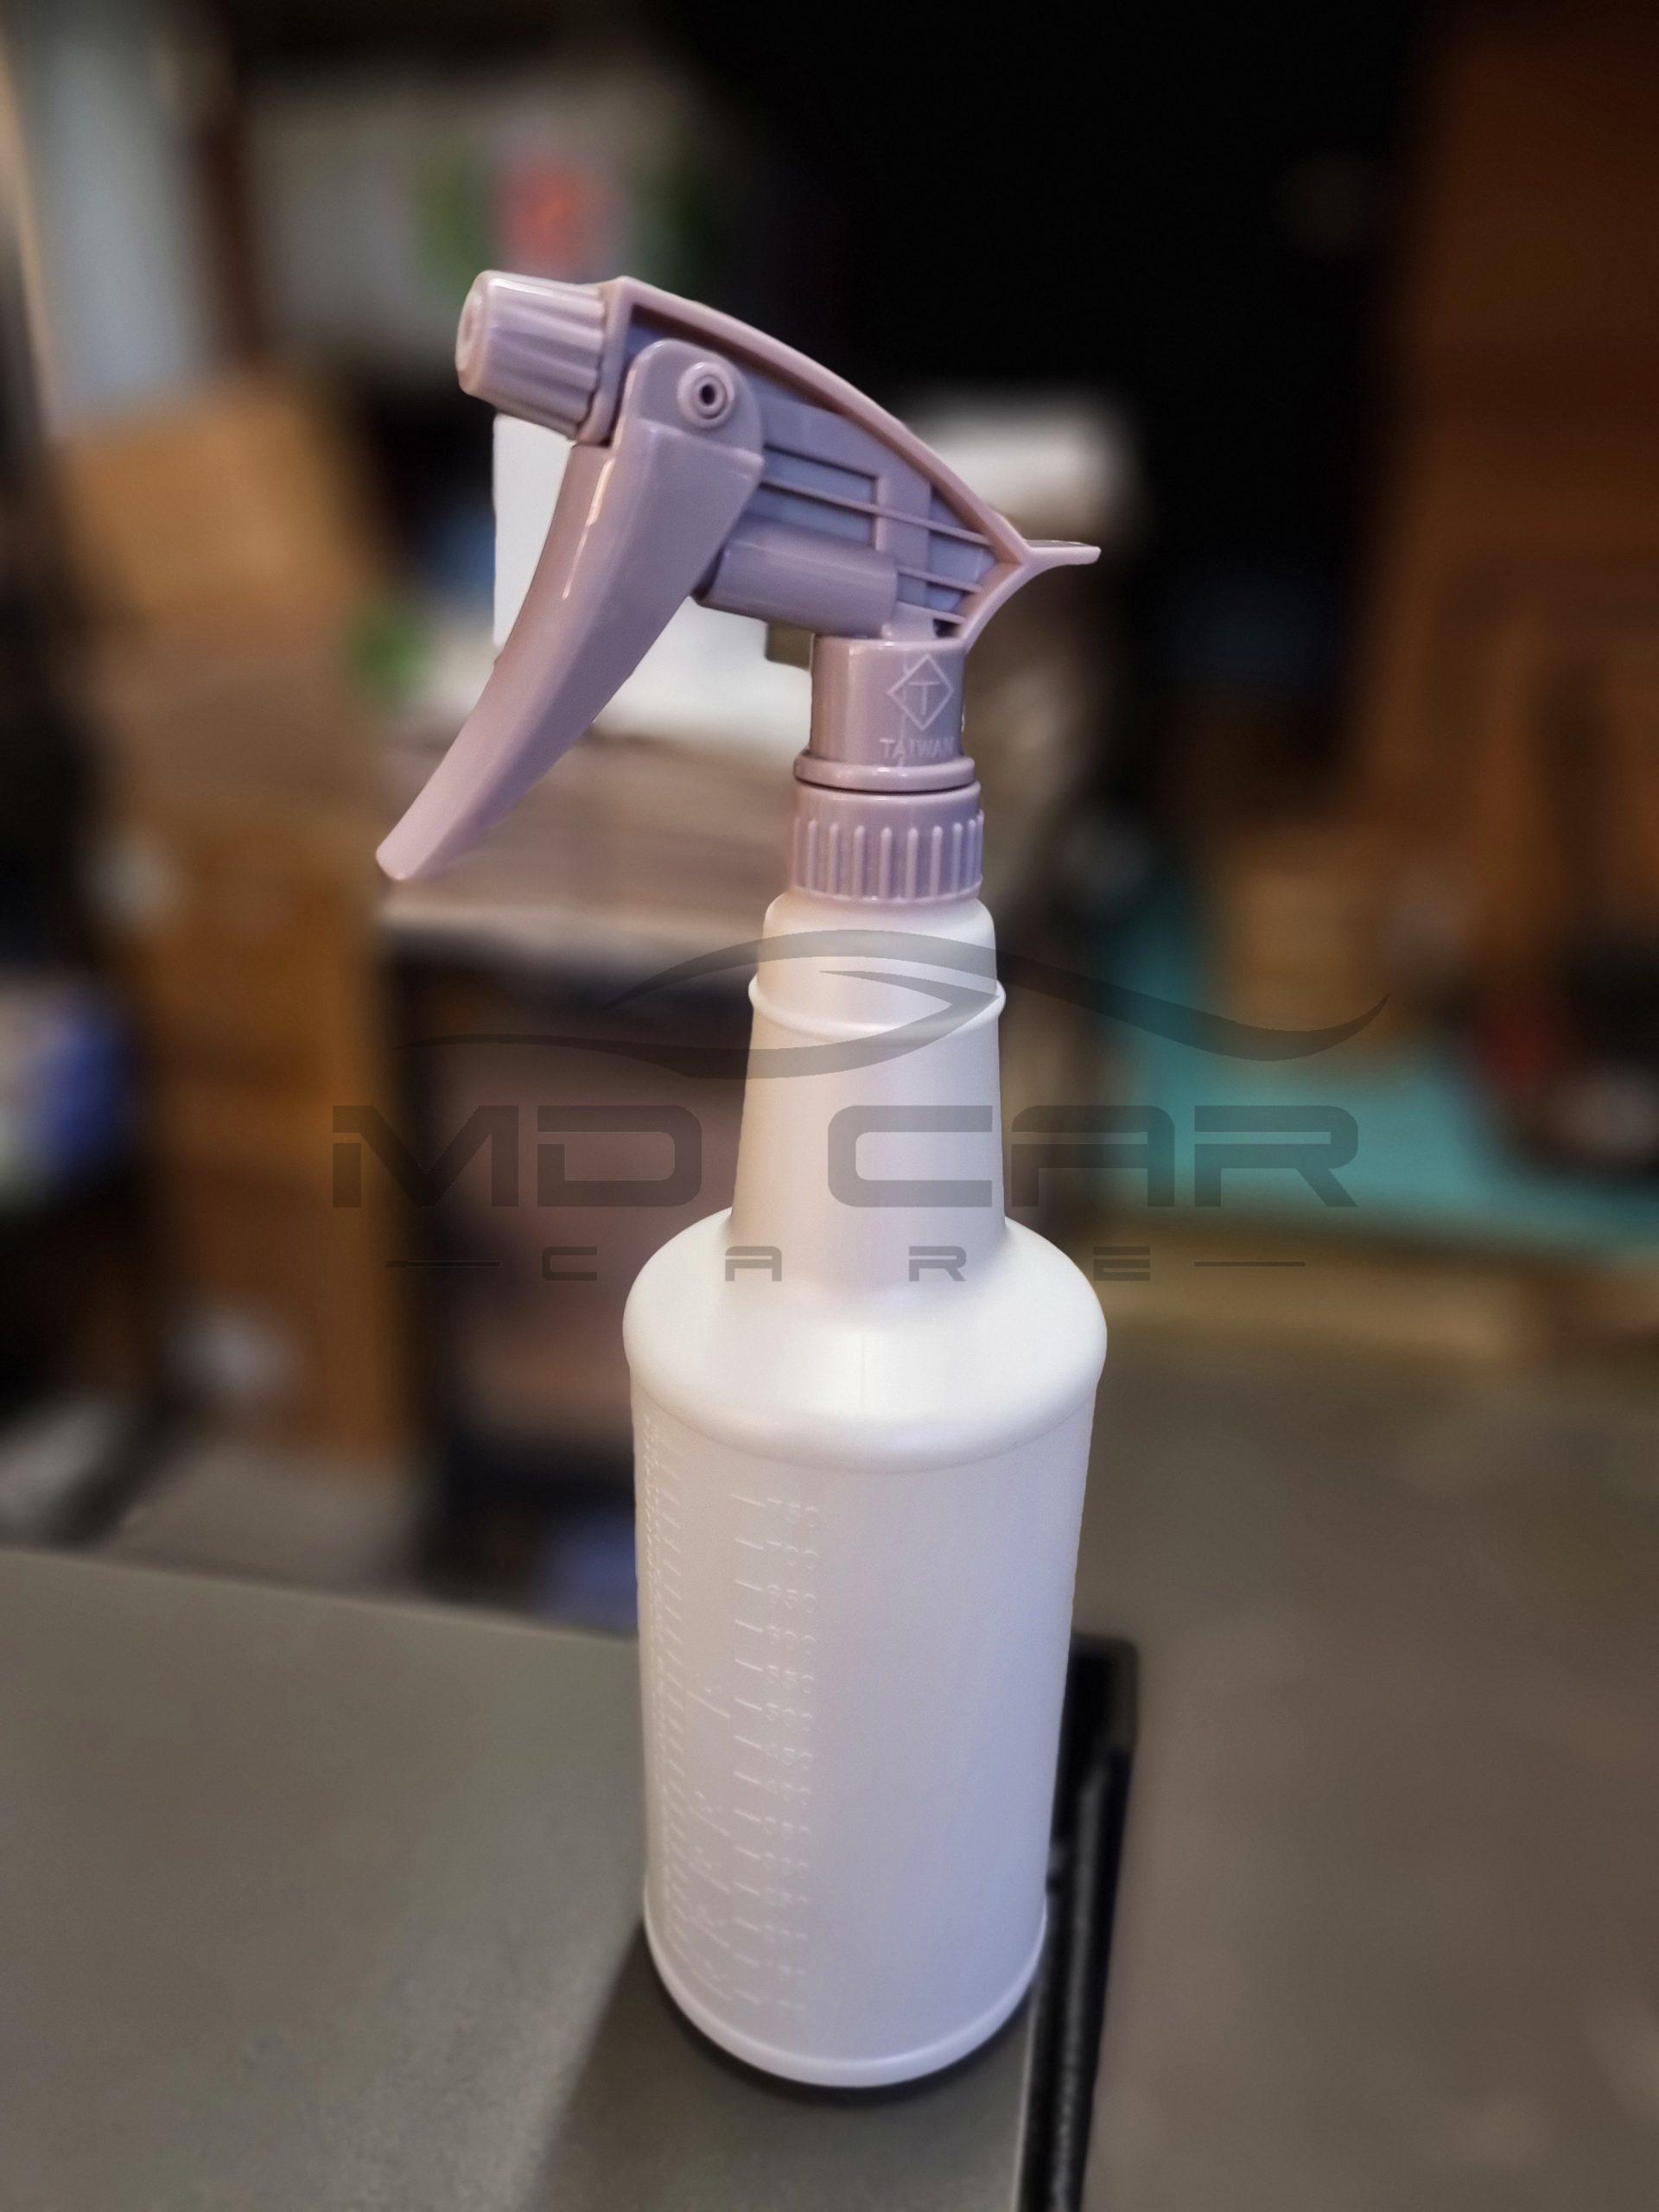 GOING PRO 2: All About the New iK Pro 2 Foam & Multi Sprayers